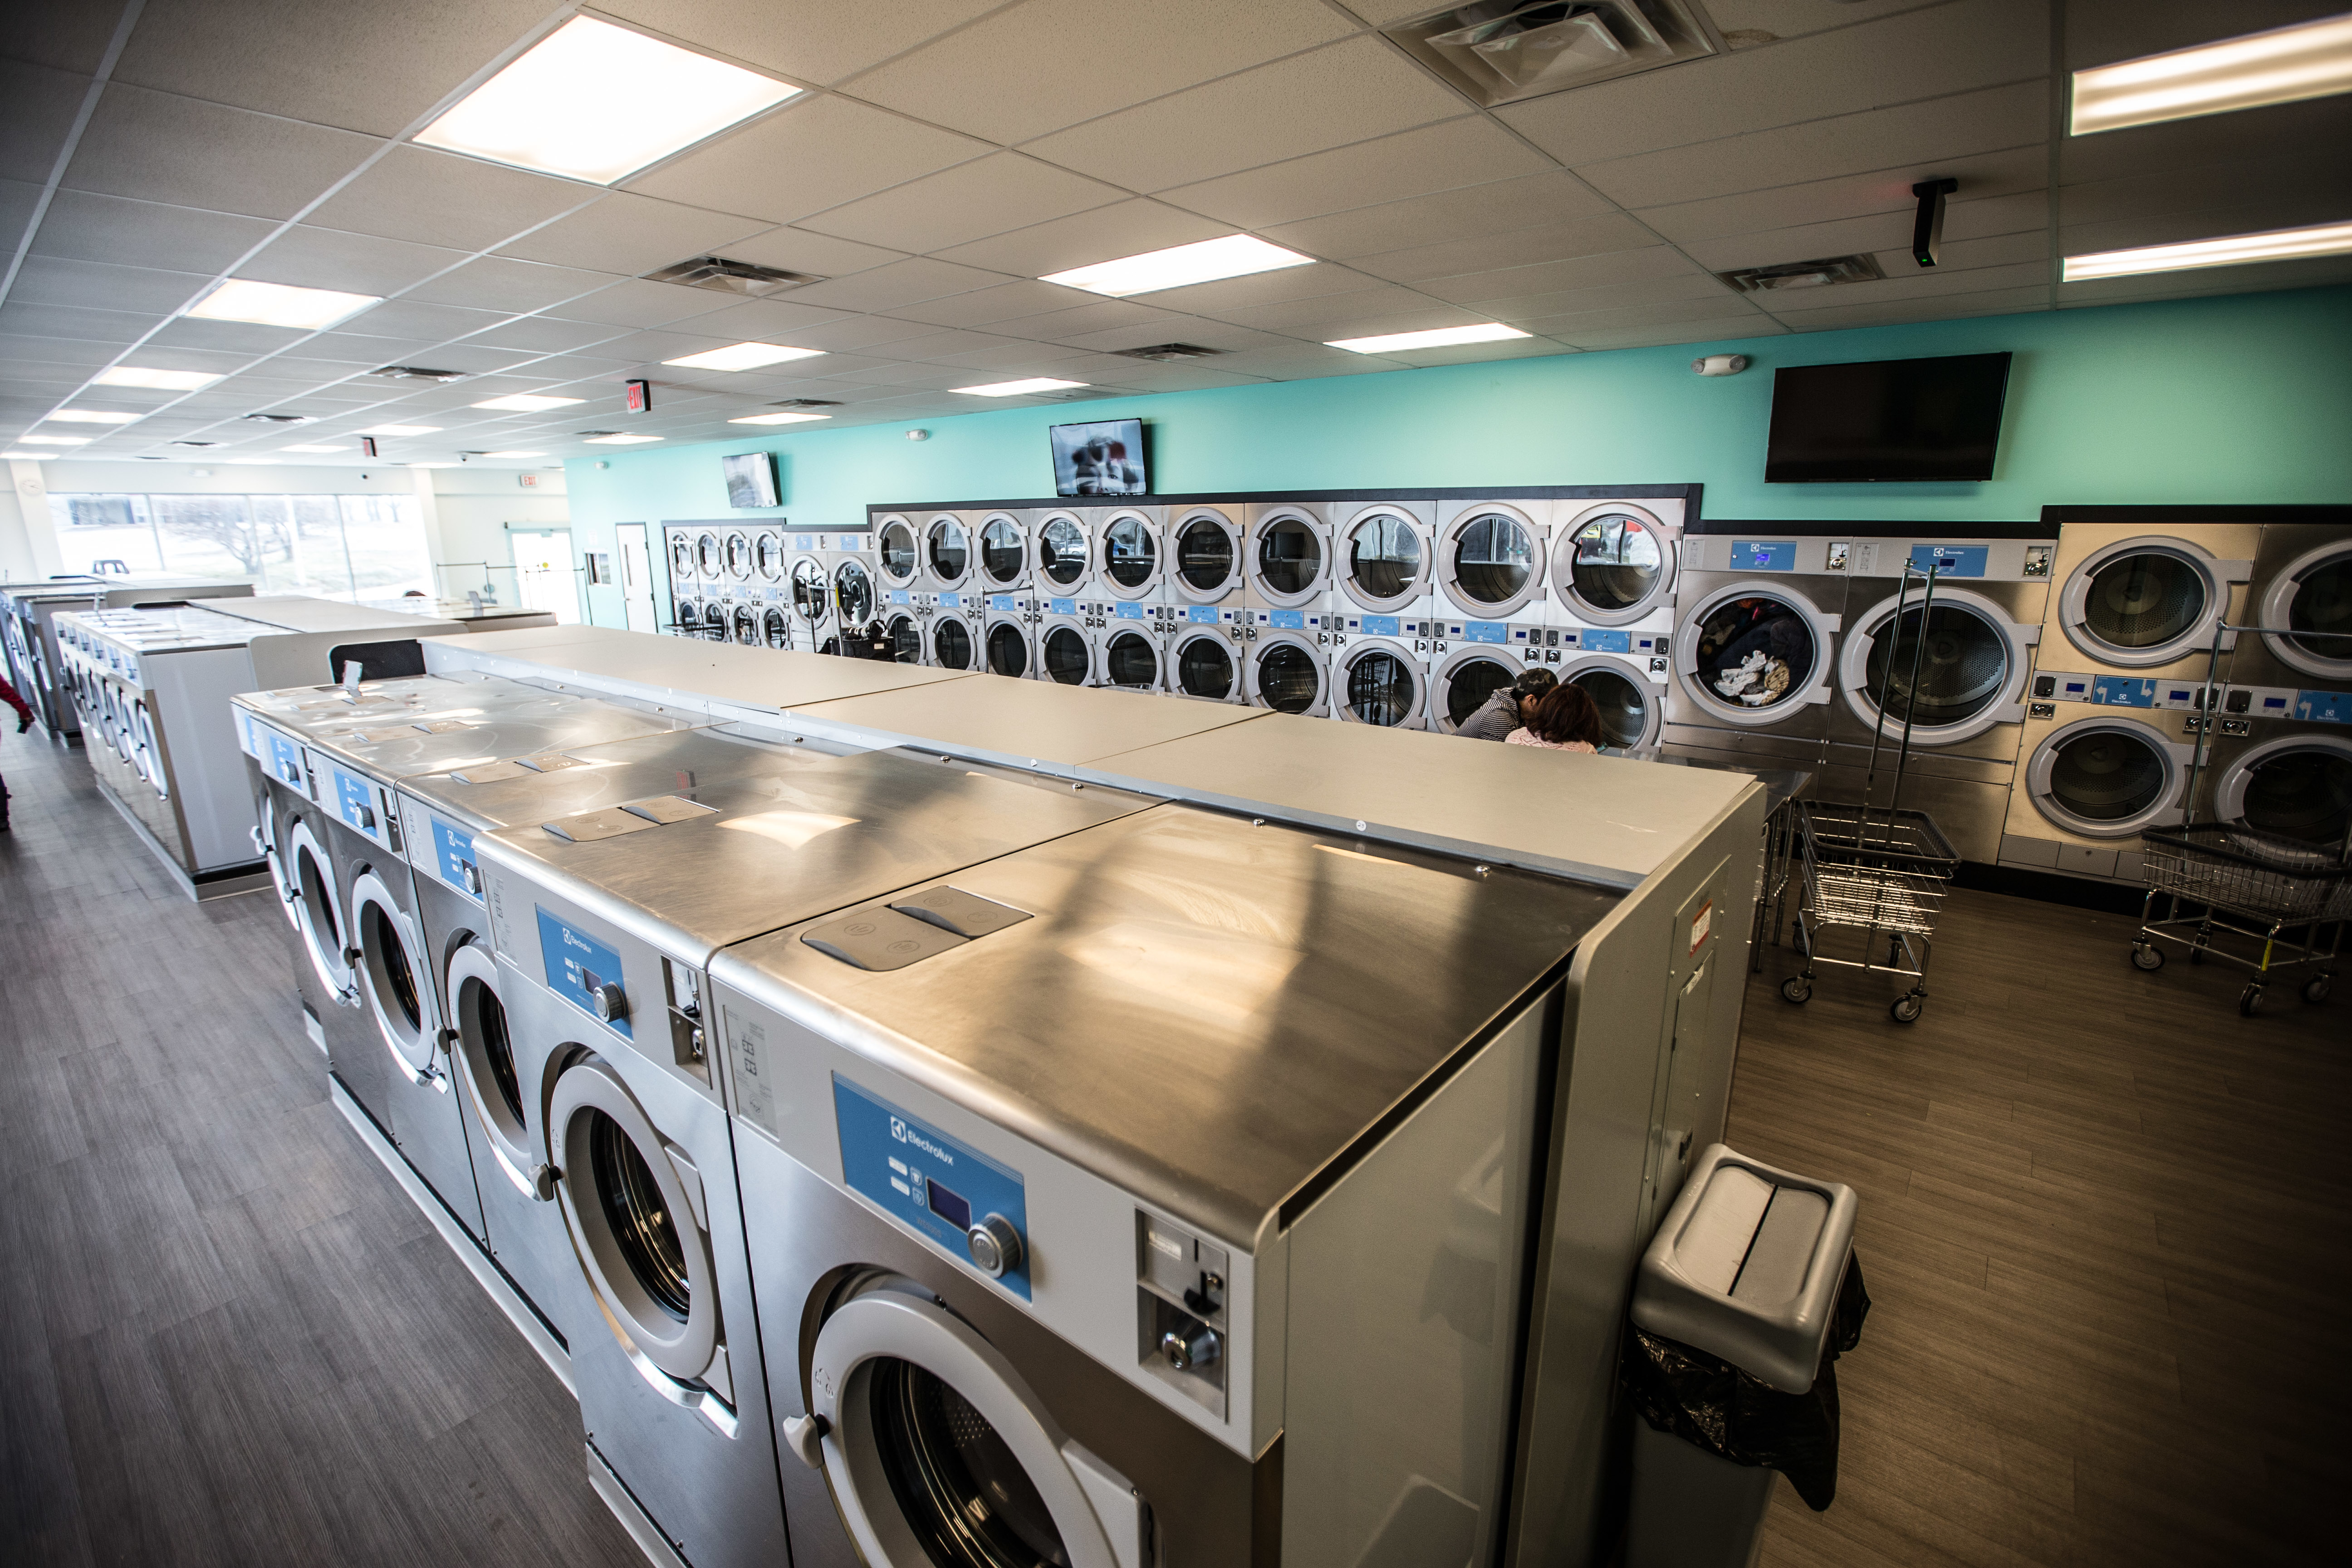 Anytime Coin Laundry Coupons near me in Omaha | 8coupons